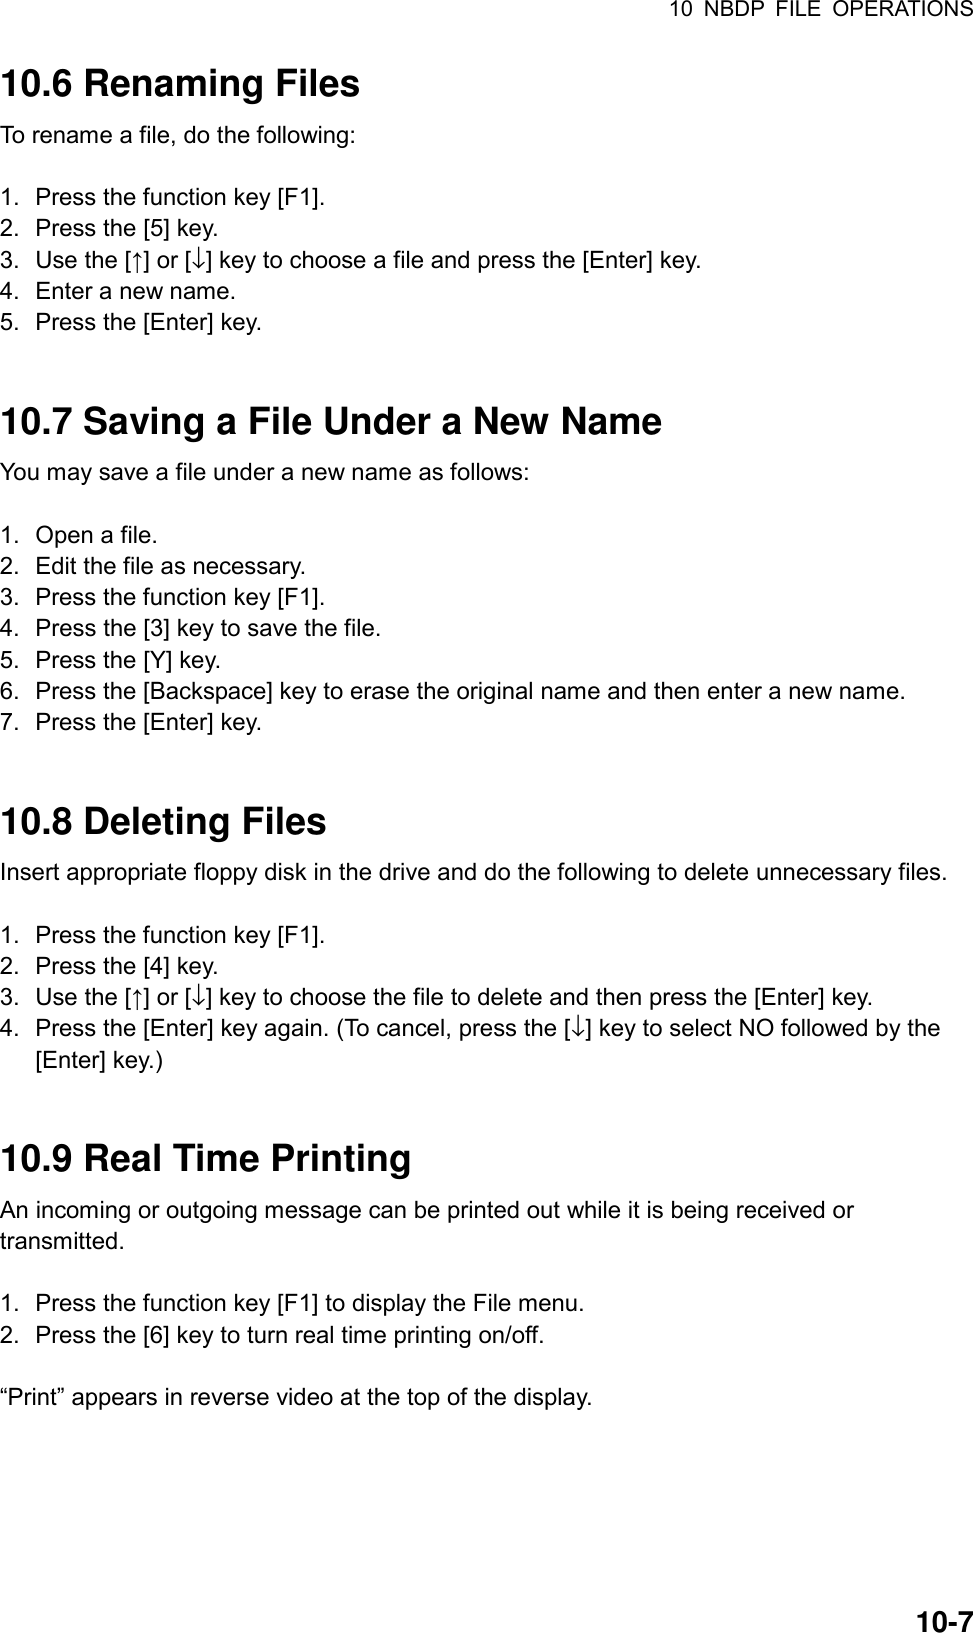 10 NBDP FILE OPERATIONS  10-710.6 Renaming Files To rename a file, do the following:  1.  Press the function key [F1]. 2.  Press the [5] key. 3.  Use the [↑] or [↓] key to choose a file and press the [Enter] key. 4.  Enter a new name. 5.  Press the [Enter] key.   10.7 Saving a File Under a New Name You may save a file under a new name as follows:  1.  Open a file. 2.  Edit the file as necessary. 3.  Press the function key [F1]. 4.  Press the [3] key to save the file. 5.  Press the [Y] key. 6.  Press the [Backspace] key to erase the original name and then enter a new name. 7.  Press the [Enter] key.   10.8 Deleting Files Insert appropriate floppy disk in the drive and do the following to delete unnecessary files.  1.  Press the function key [F1]. 2.  Press the [4] key. 3.  Use the [↑] or [↓] key to choose the file to delete and then press the [Enter] key. 4.  Press the [Enter] key again. (To cancel, press the [↓] key to select NO followed by the [Enter] key.)   10.9 Real Time Printing An incoming or outgoing message can be printed out while it is being received or transmitted.  1.  Press the function key [F1] to display the File menu. 2.  Press the [6] key to turn real time printing on/off.  “Print” appears in reverse video at the top of the display.   